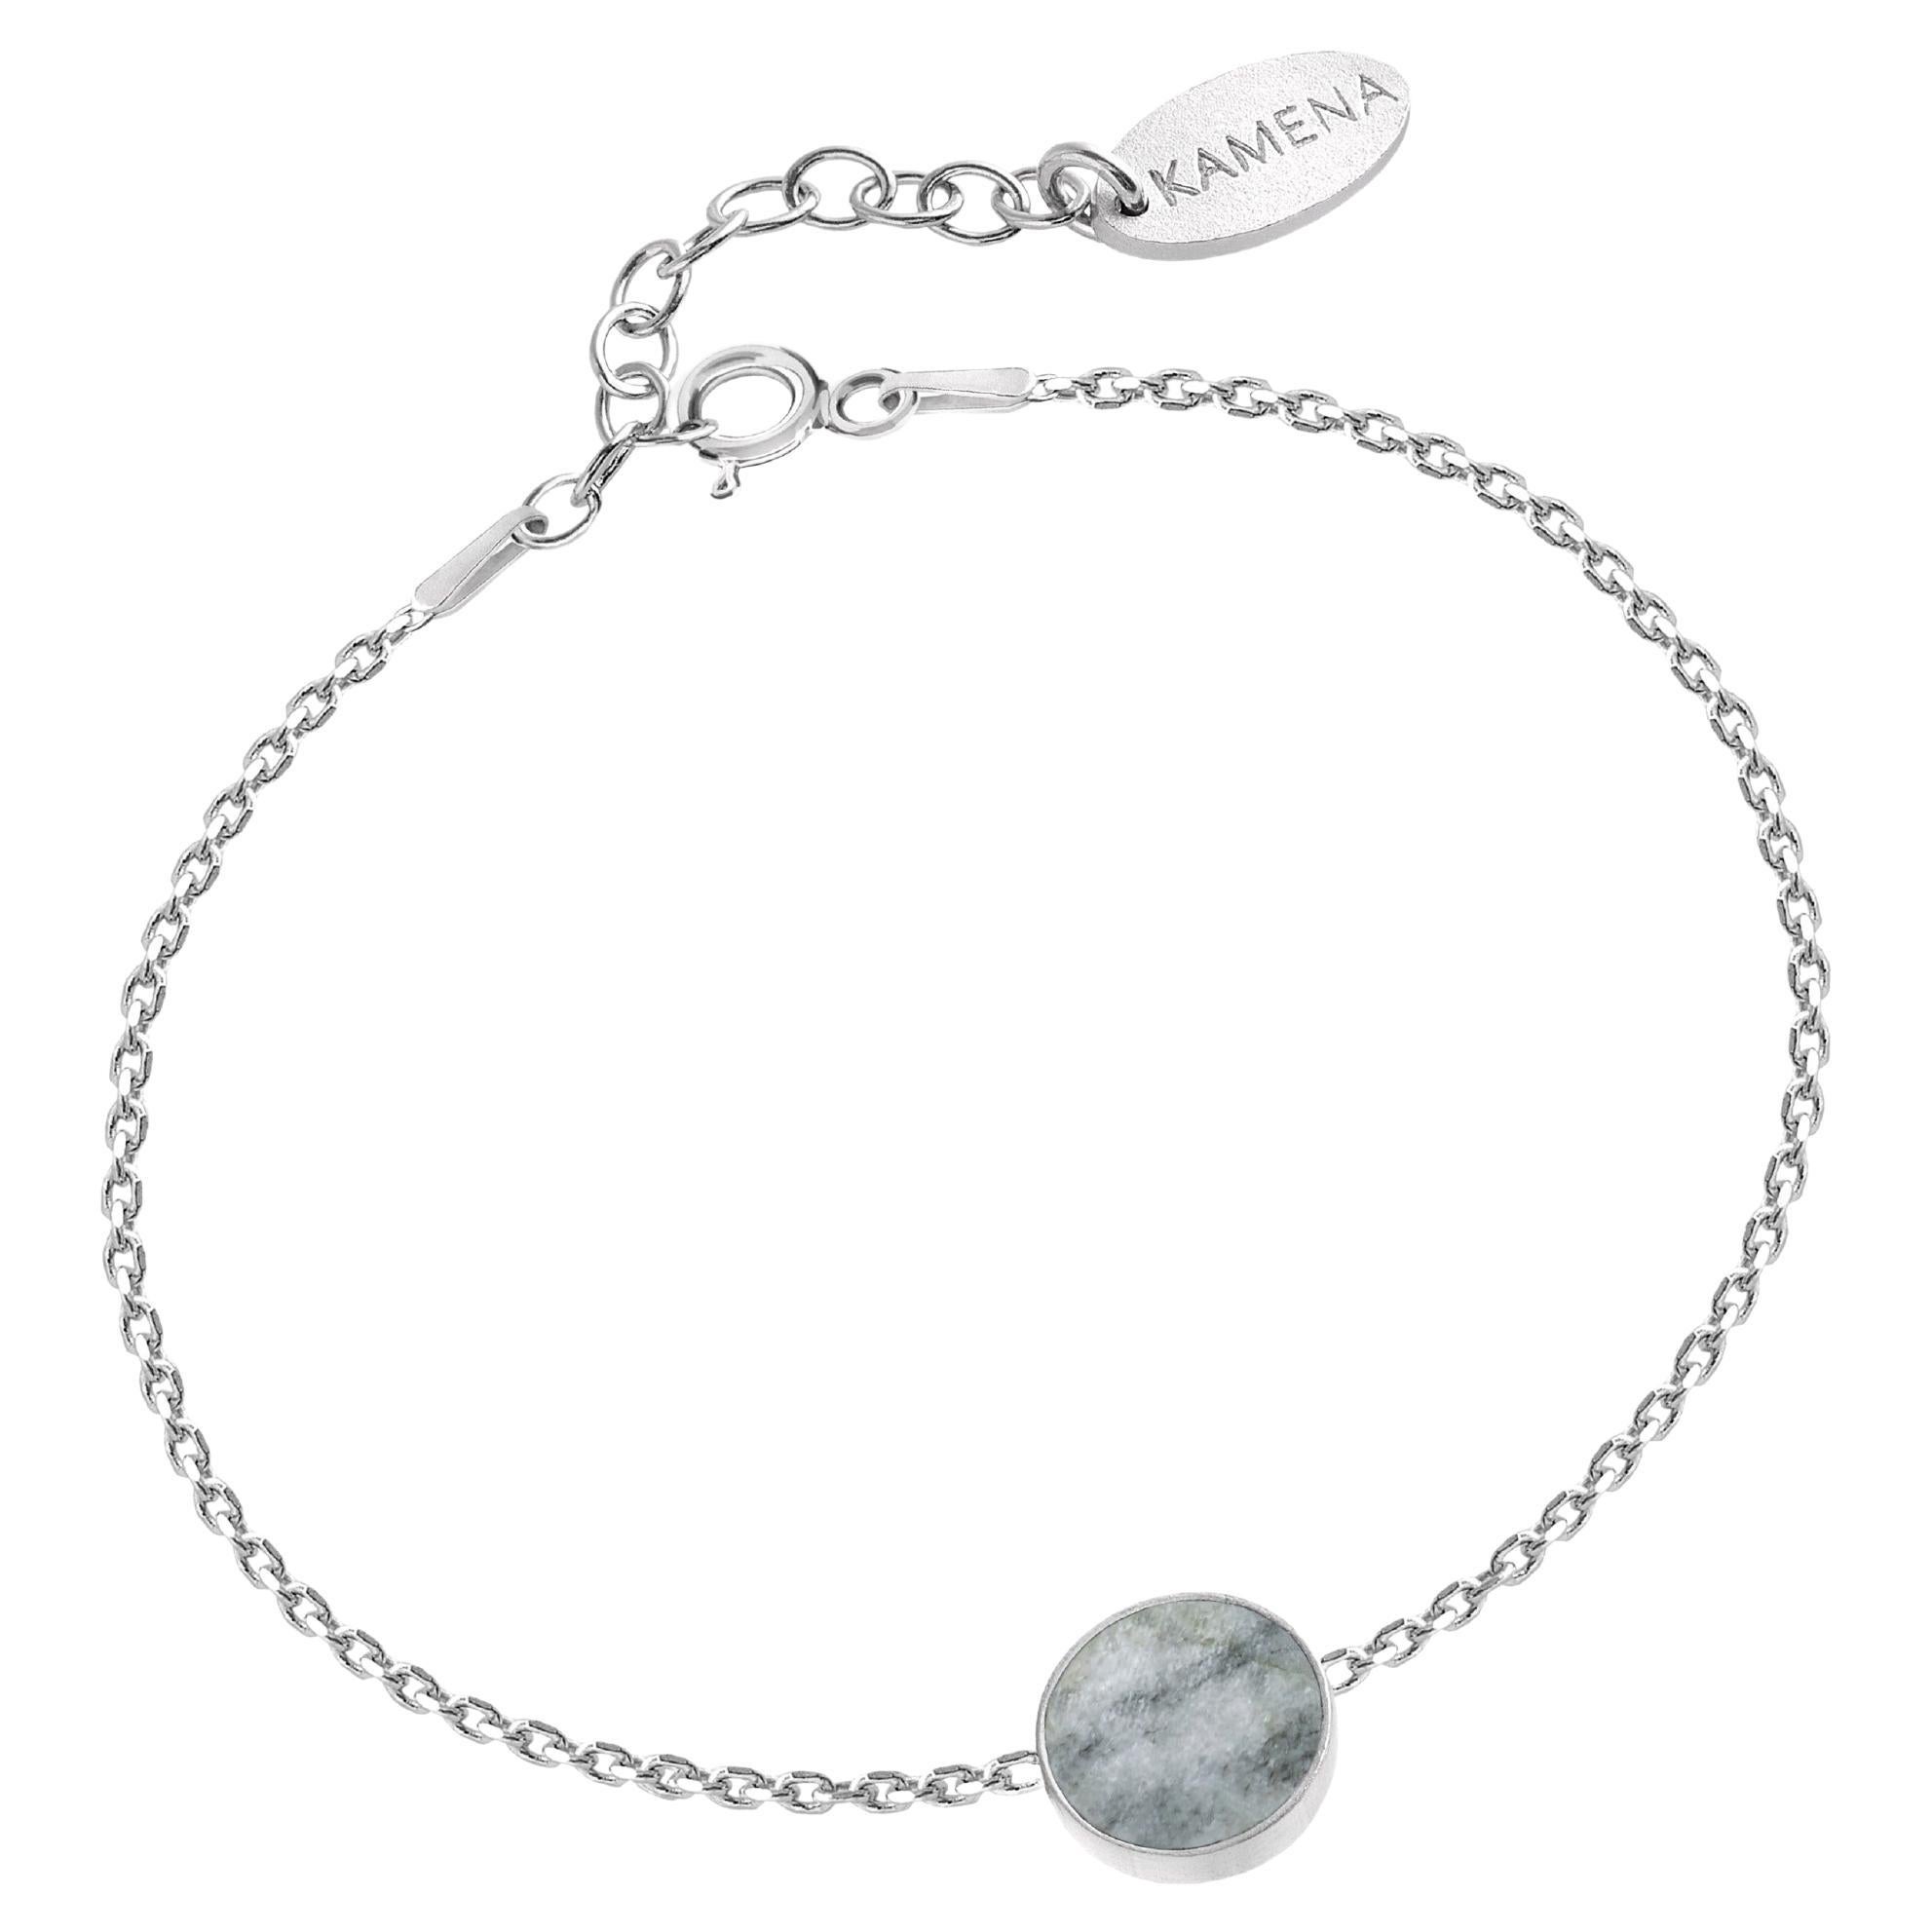 Sterling silver bracelet with natural grey stone Dolomite Picasso